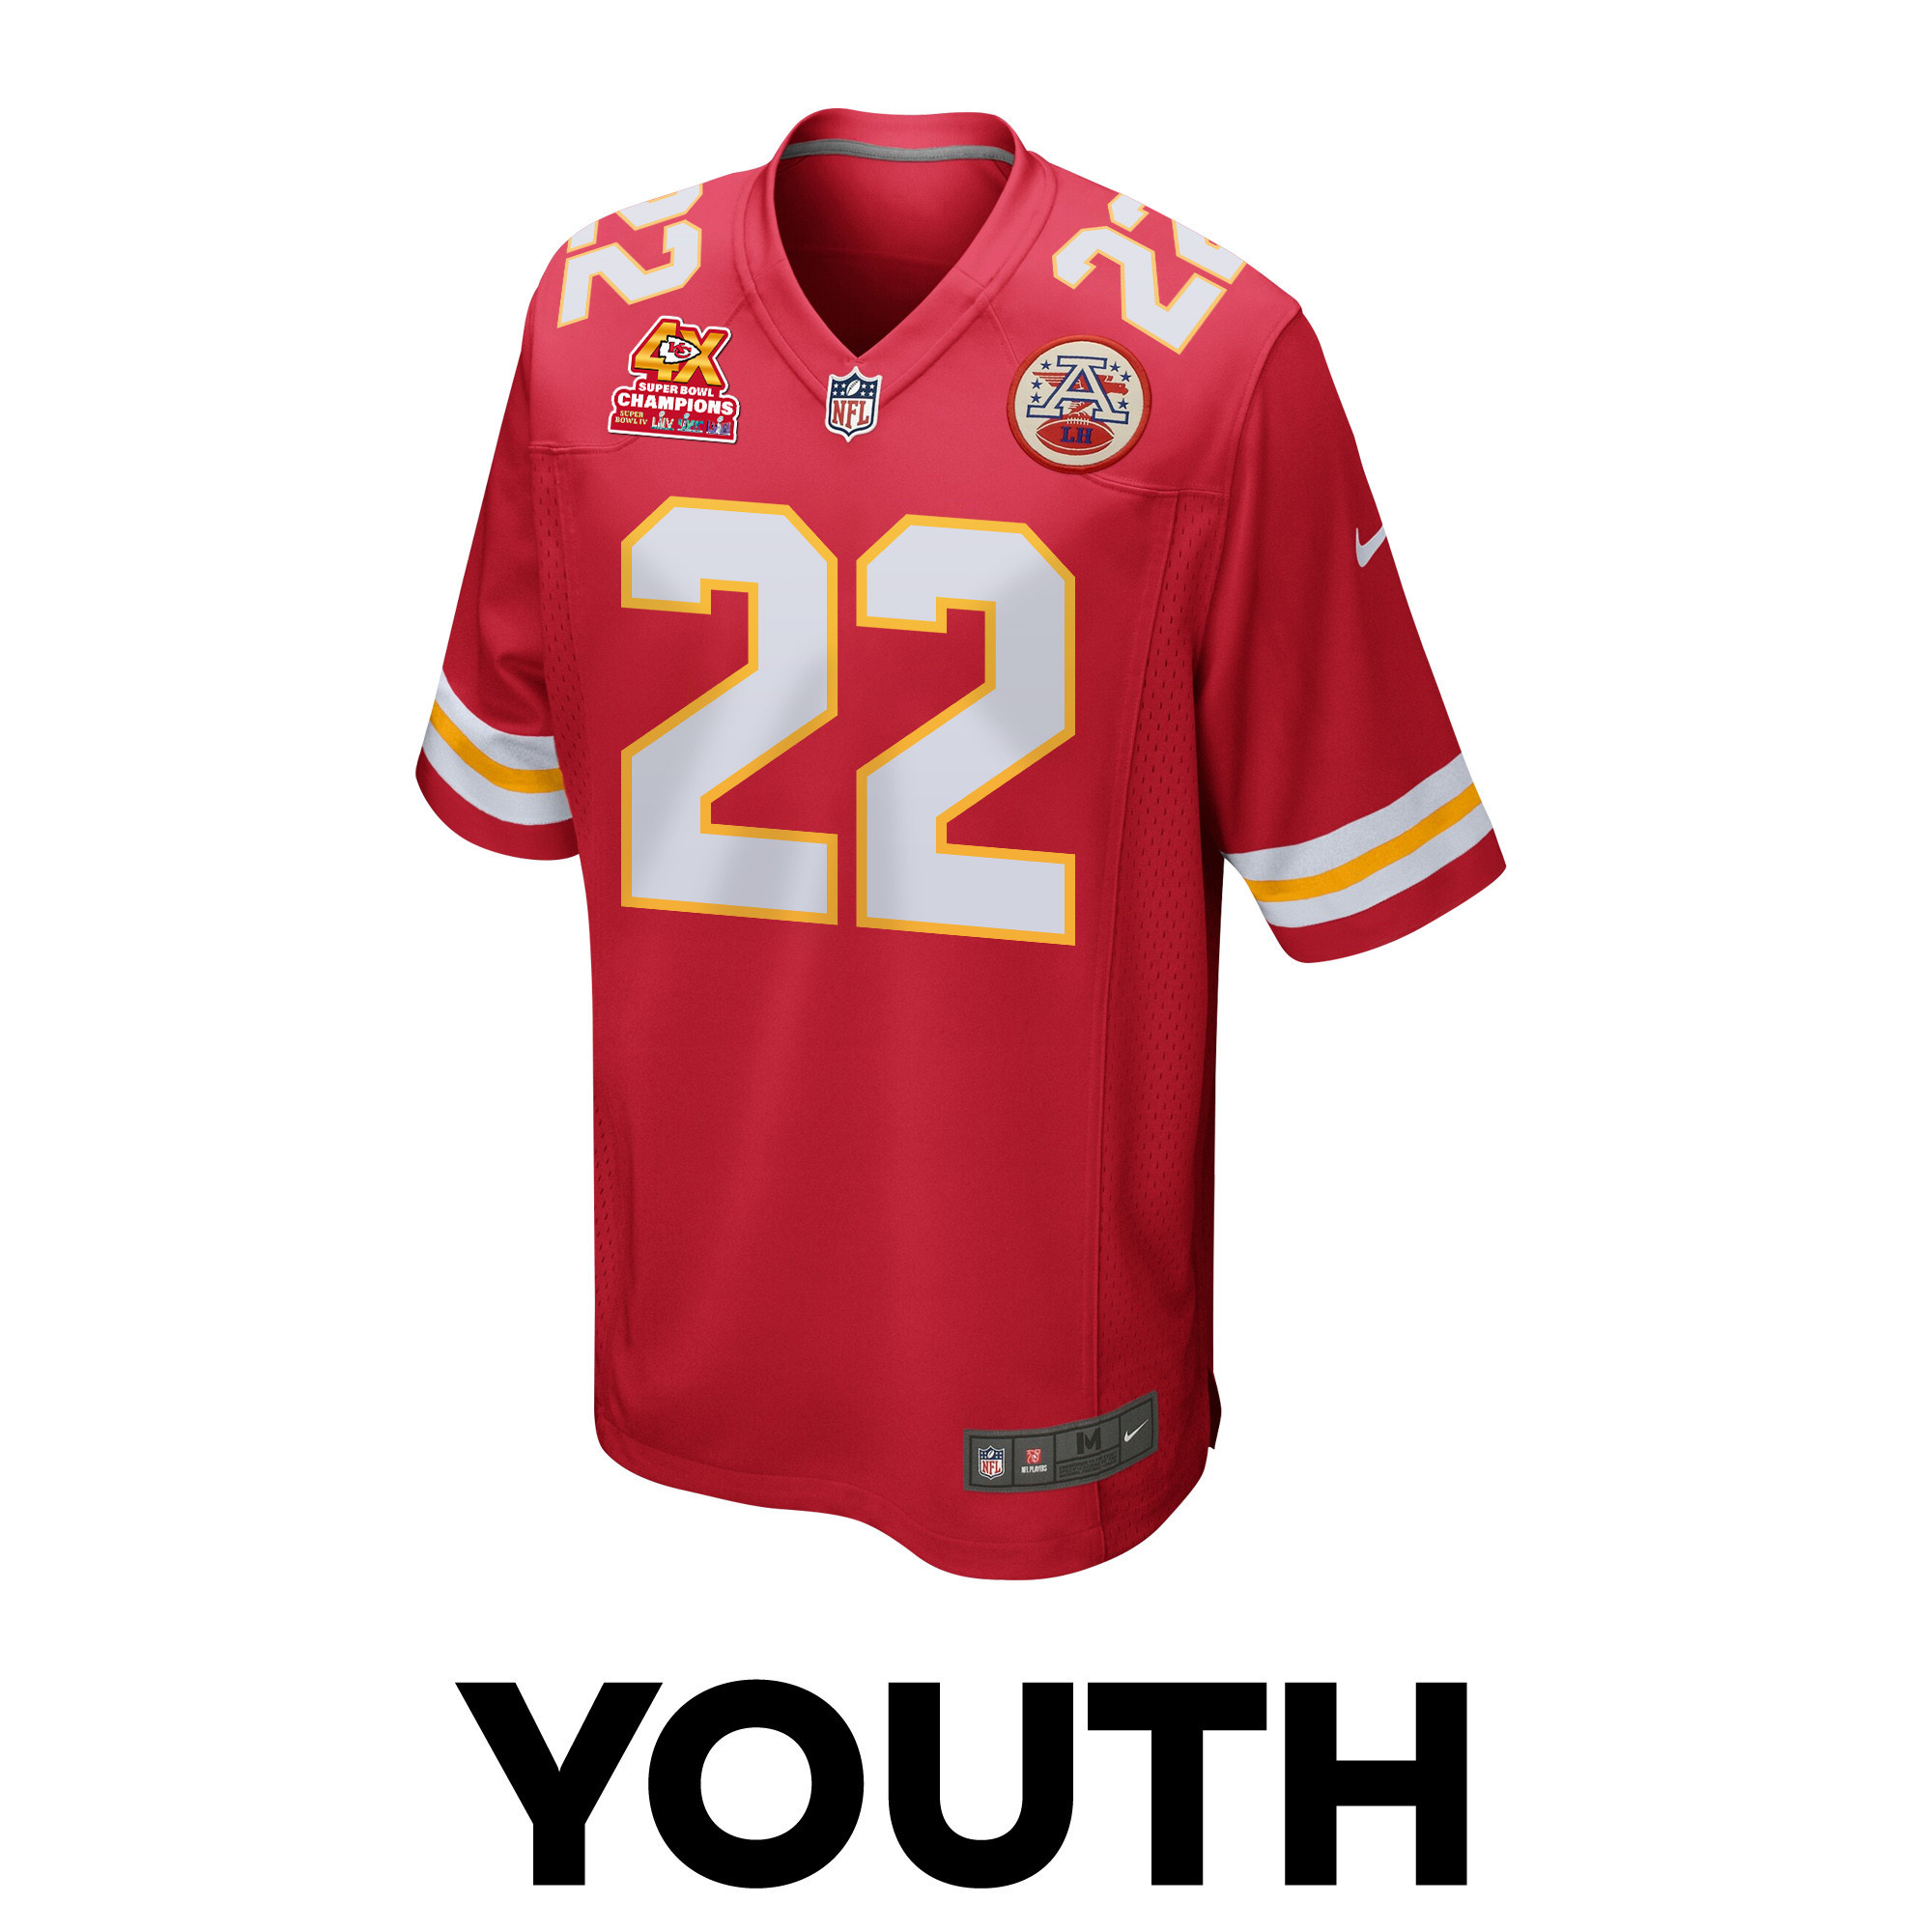 Trent McDuffie 22 Kansas City Chiefs Super Bowl LVIII Champions 4X Game YOUTH Jersey - Red